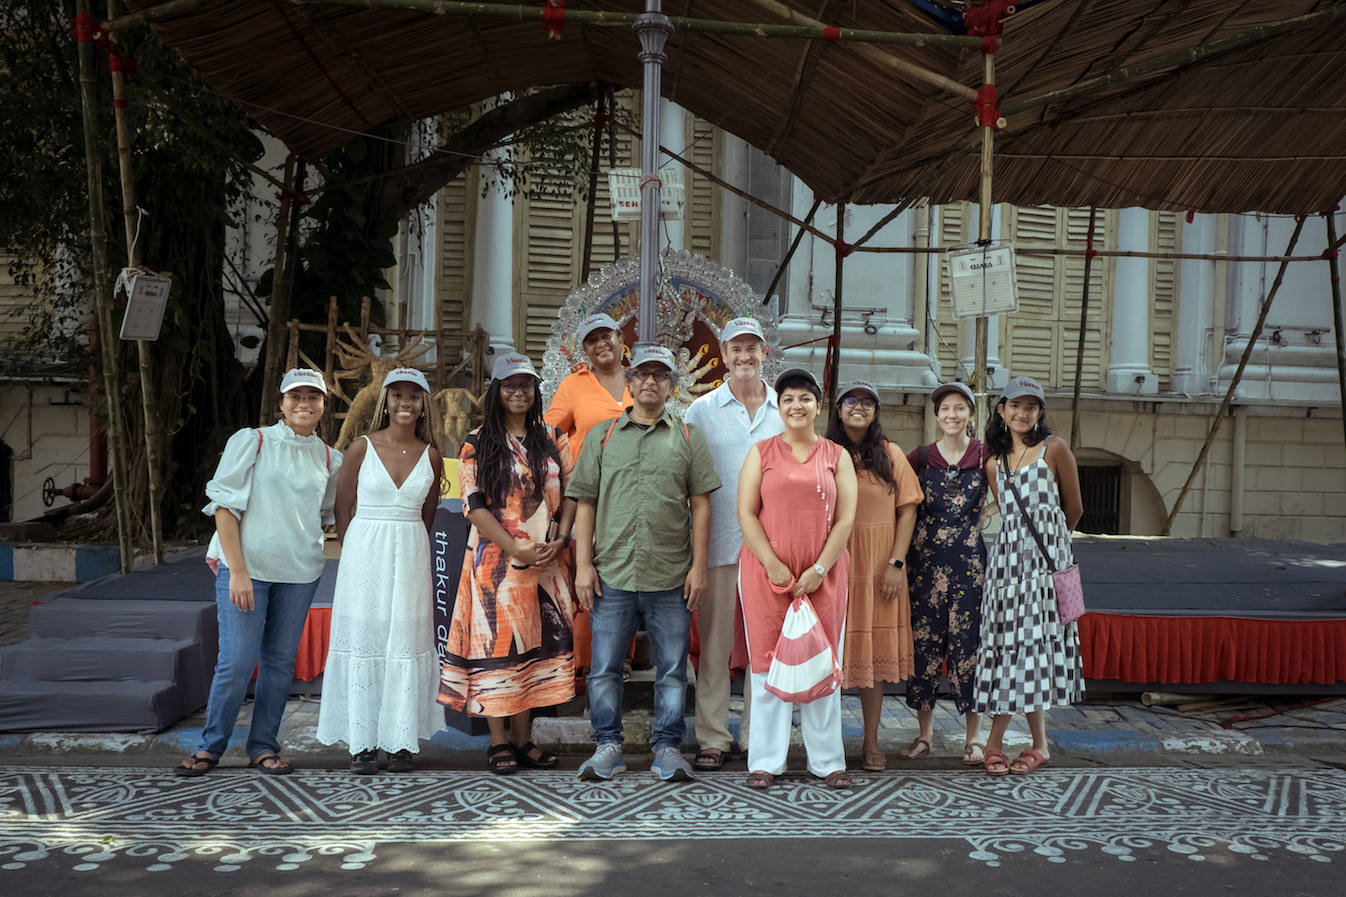 A group of people stand under a large straw roof, on a street with an intricate pattern painted on it. Behind them is a large stone building.